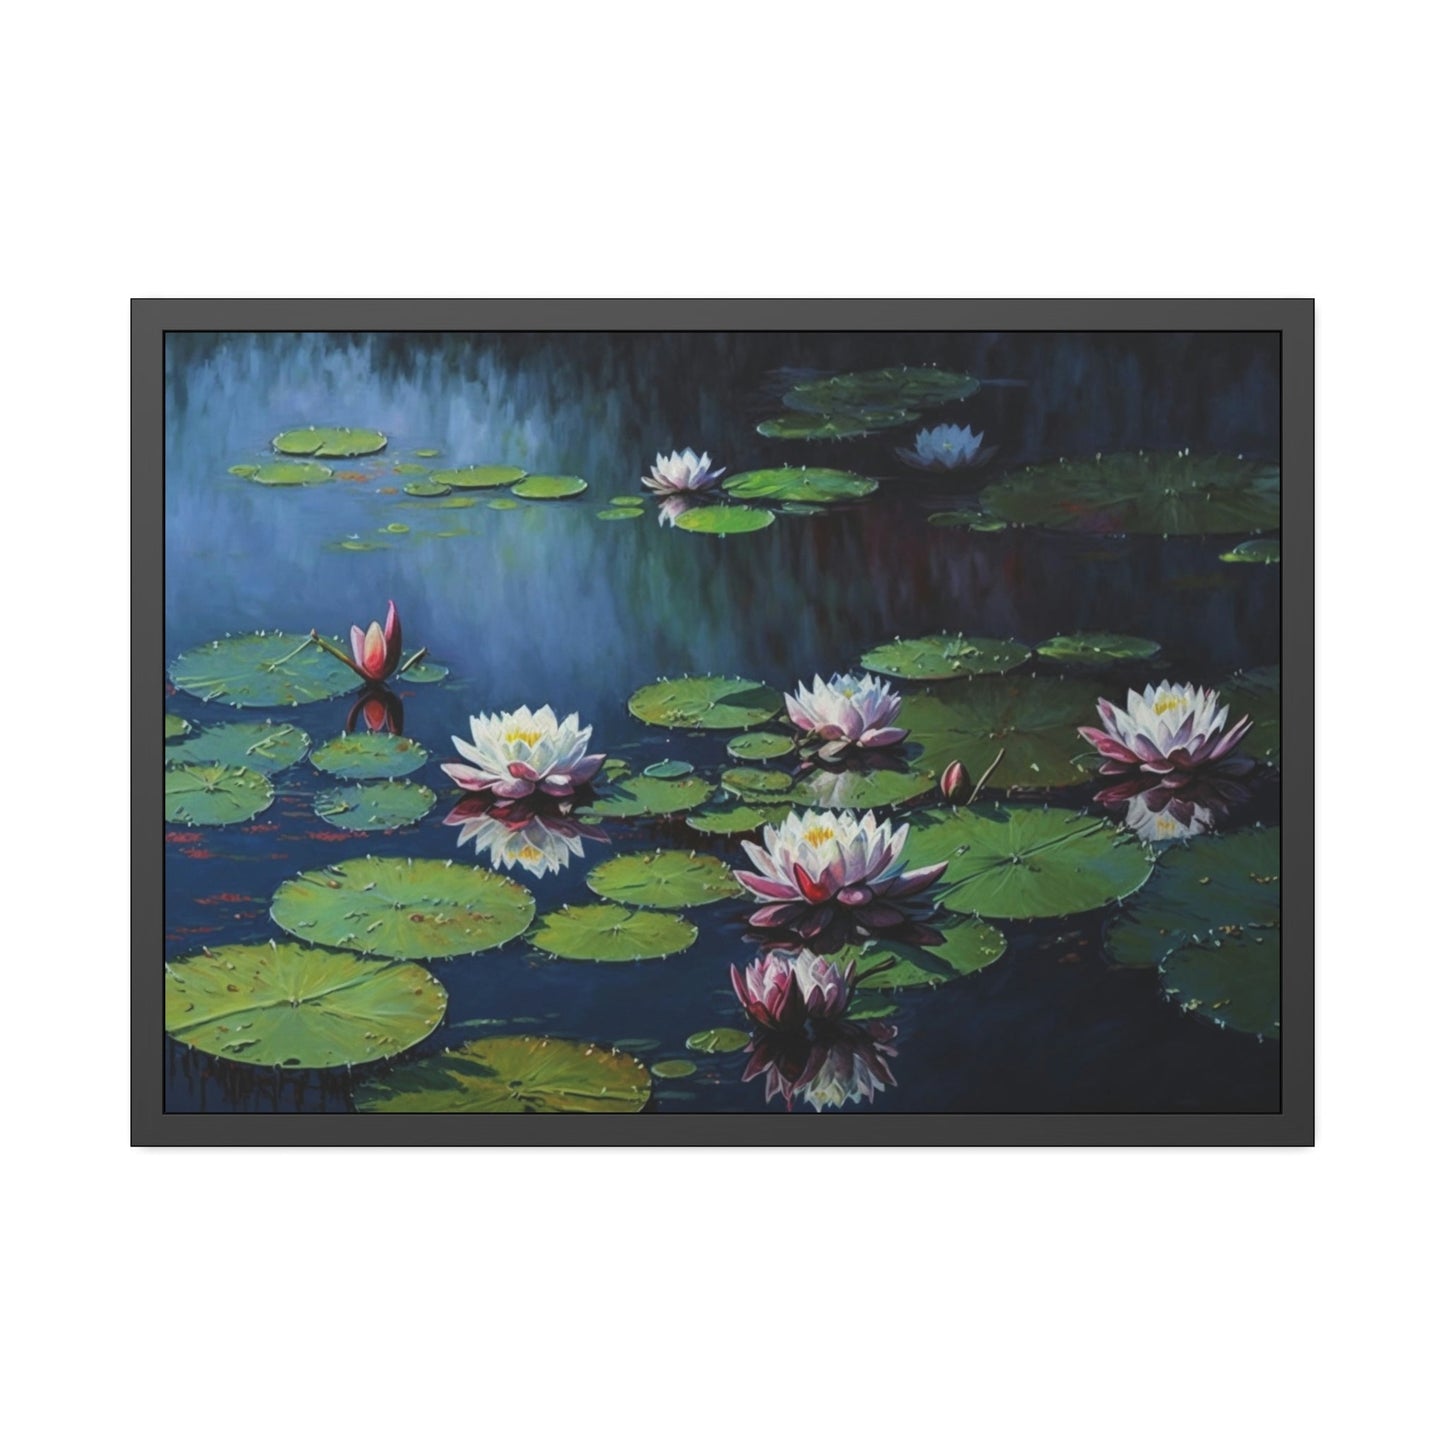 Water Lily Serenity: A Painting on Canvas